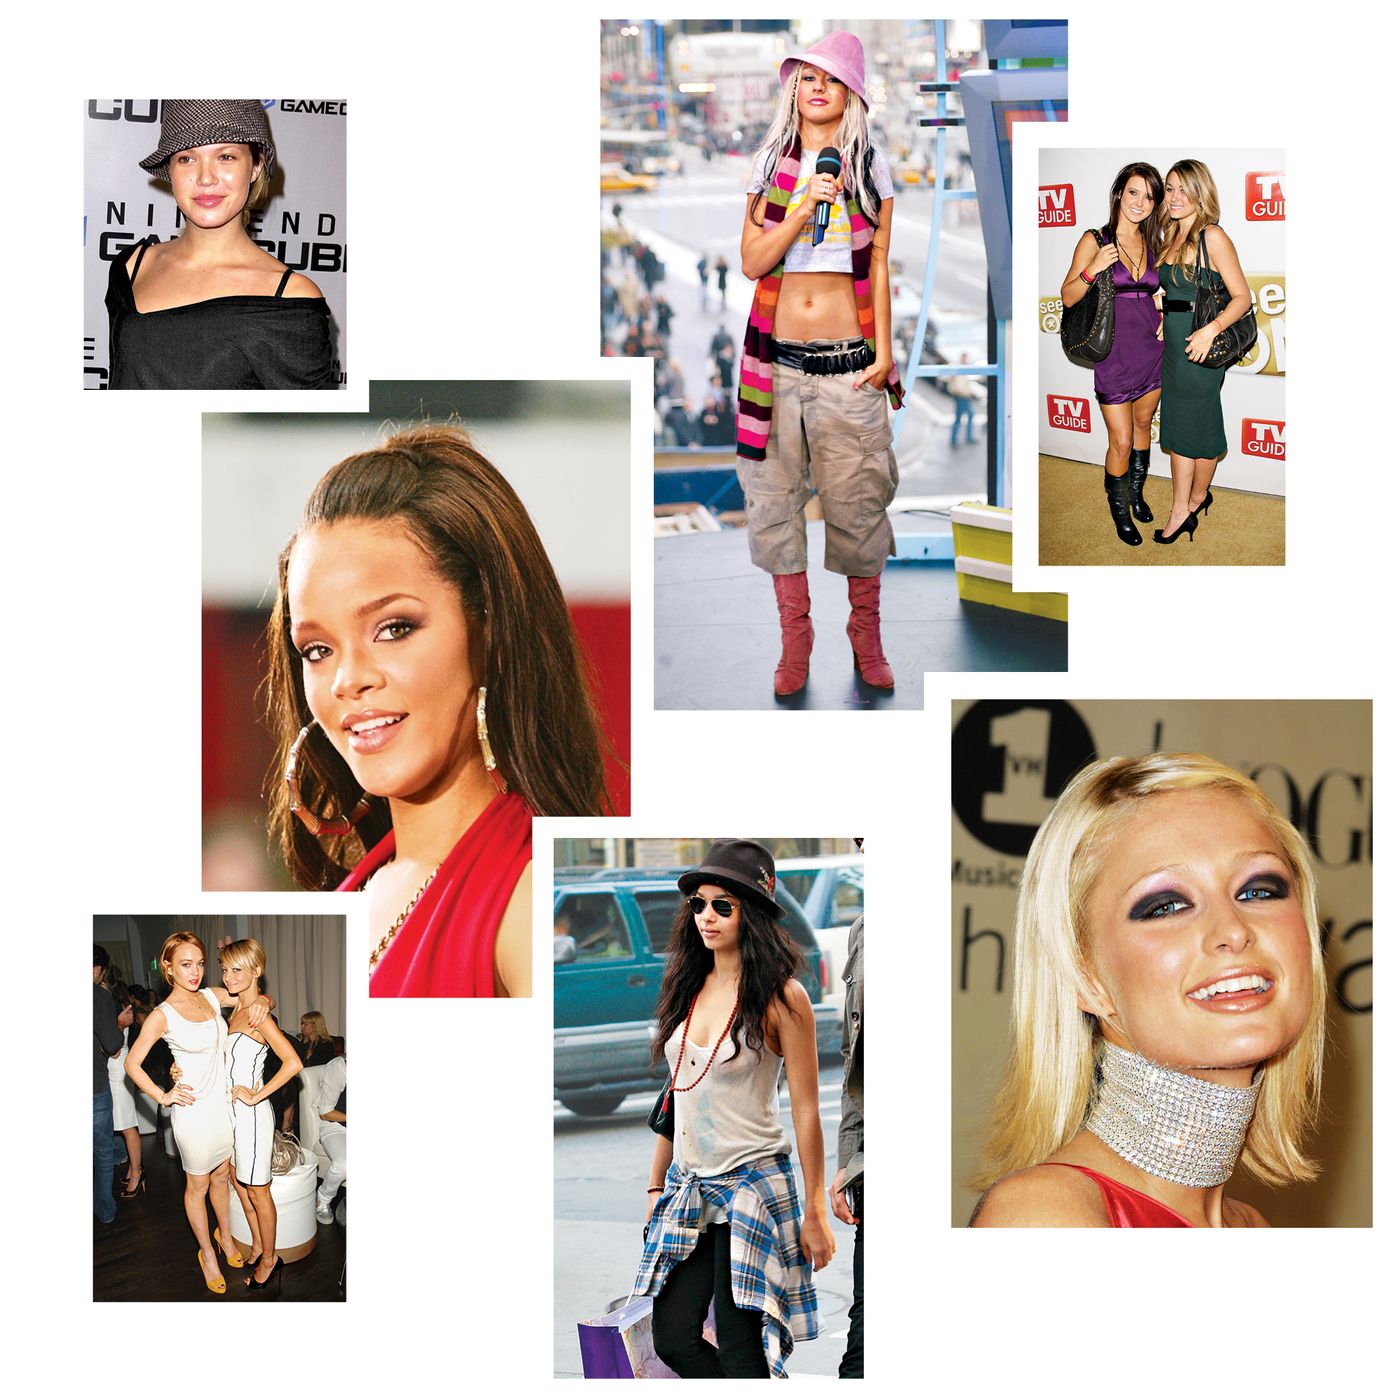 Why Early 2000s Fashion Is Trending Again – Two Cumberland